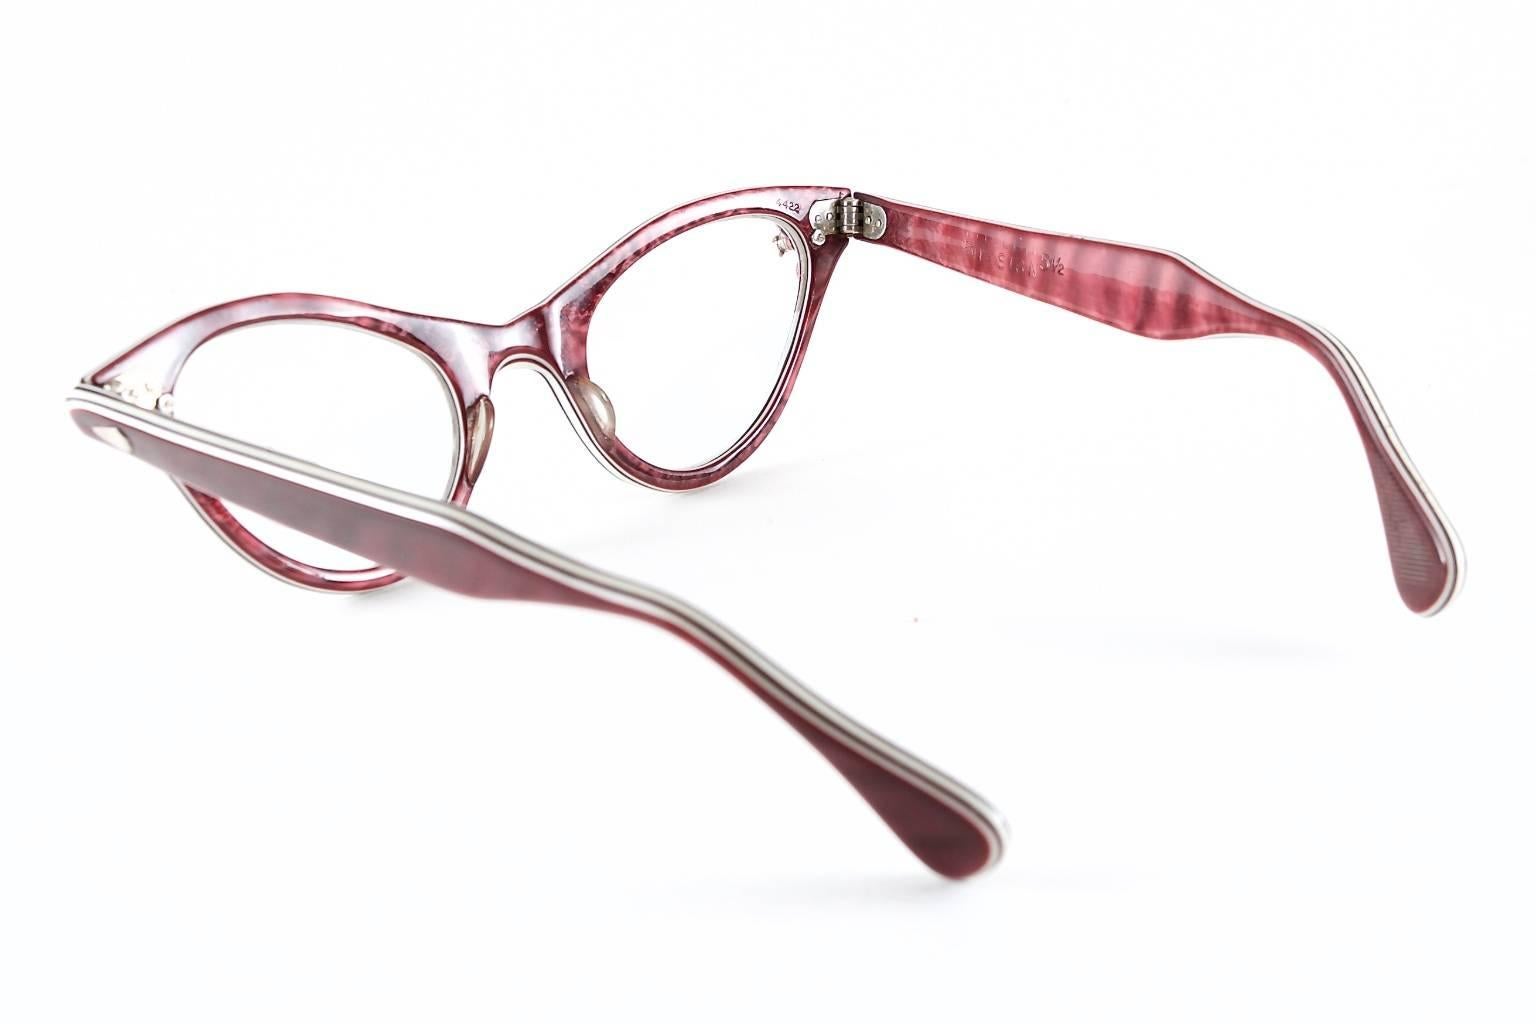  1950's cat eye glasses in plum featuring copper and cream flora pearl accents.

_____________________________________________________________
Established in 2005, Hotel de Ville is the premier destination in Los Angeles for vintage and modern